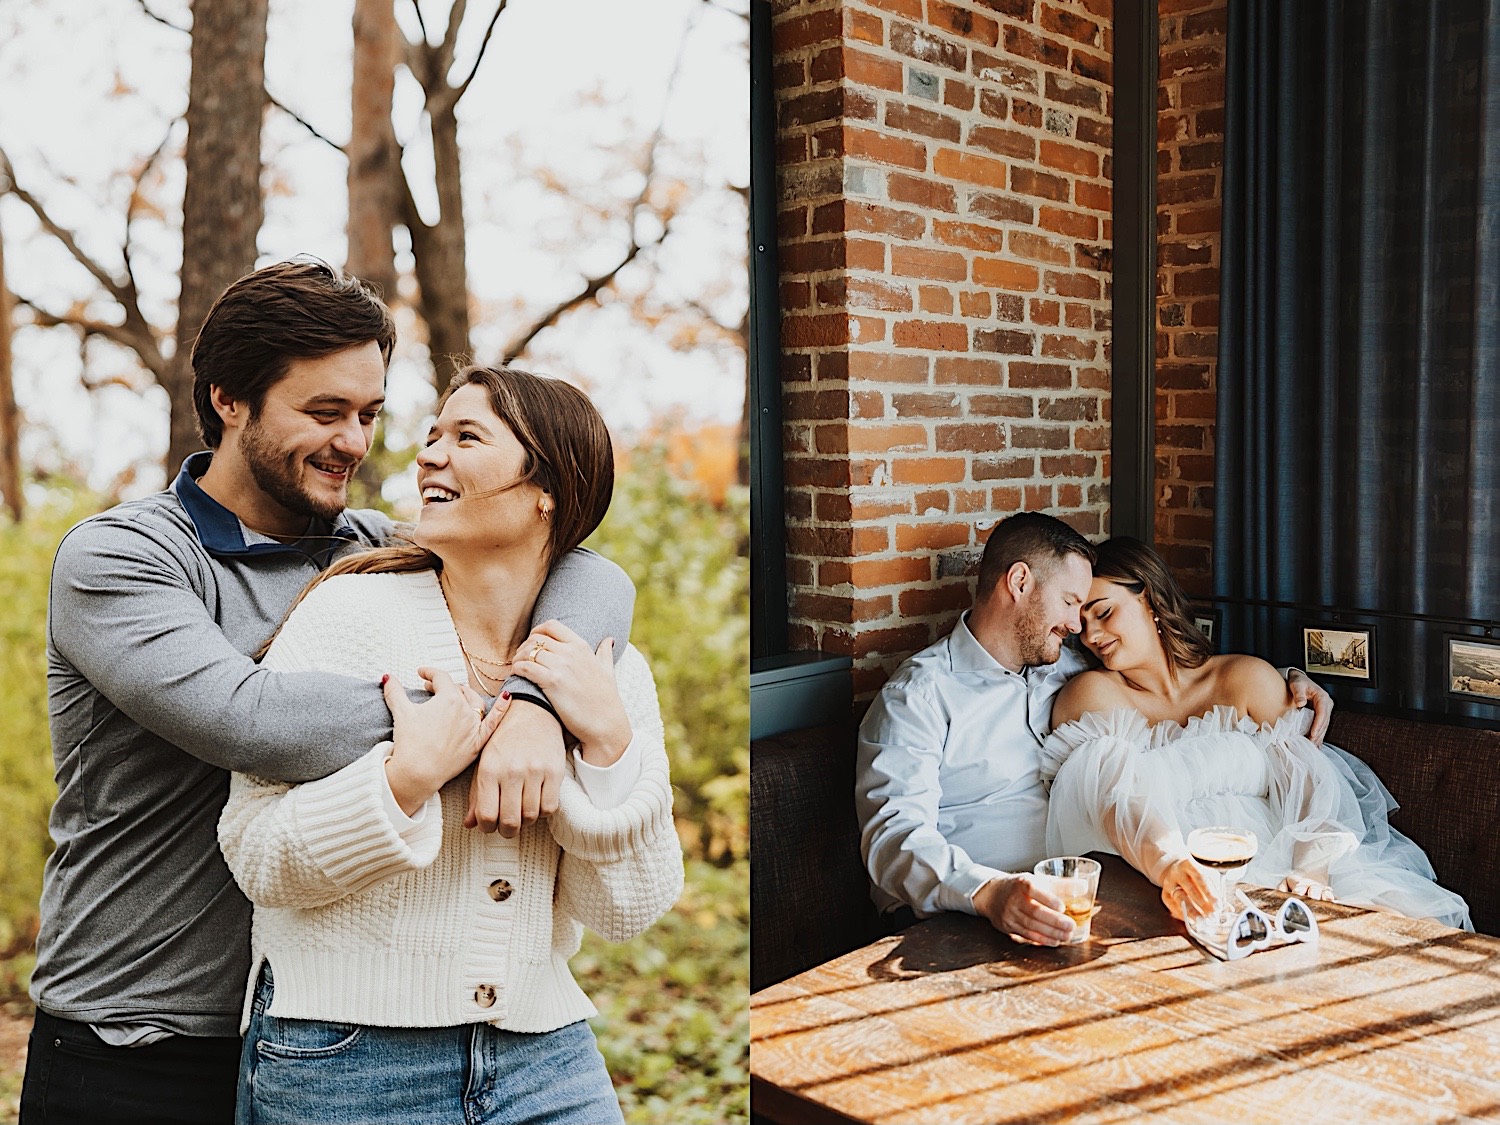 2 photos side by side, the left is of a man hugging a woman as they smile at one another while in a forest, the right is of a couple cuddling while sitting next to one another in a restaurant